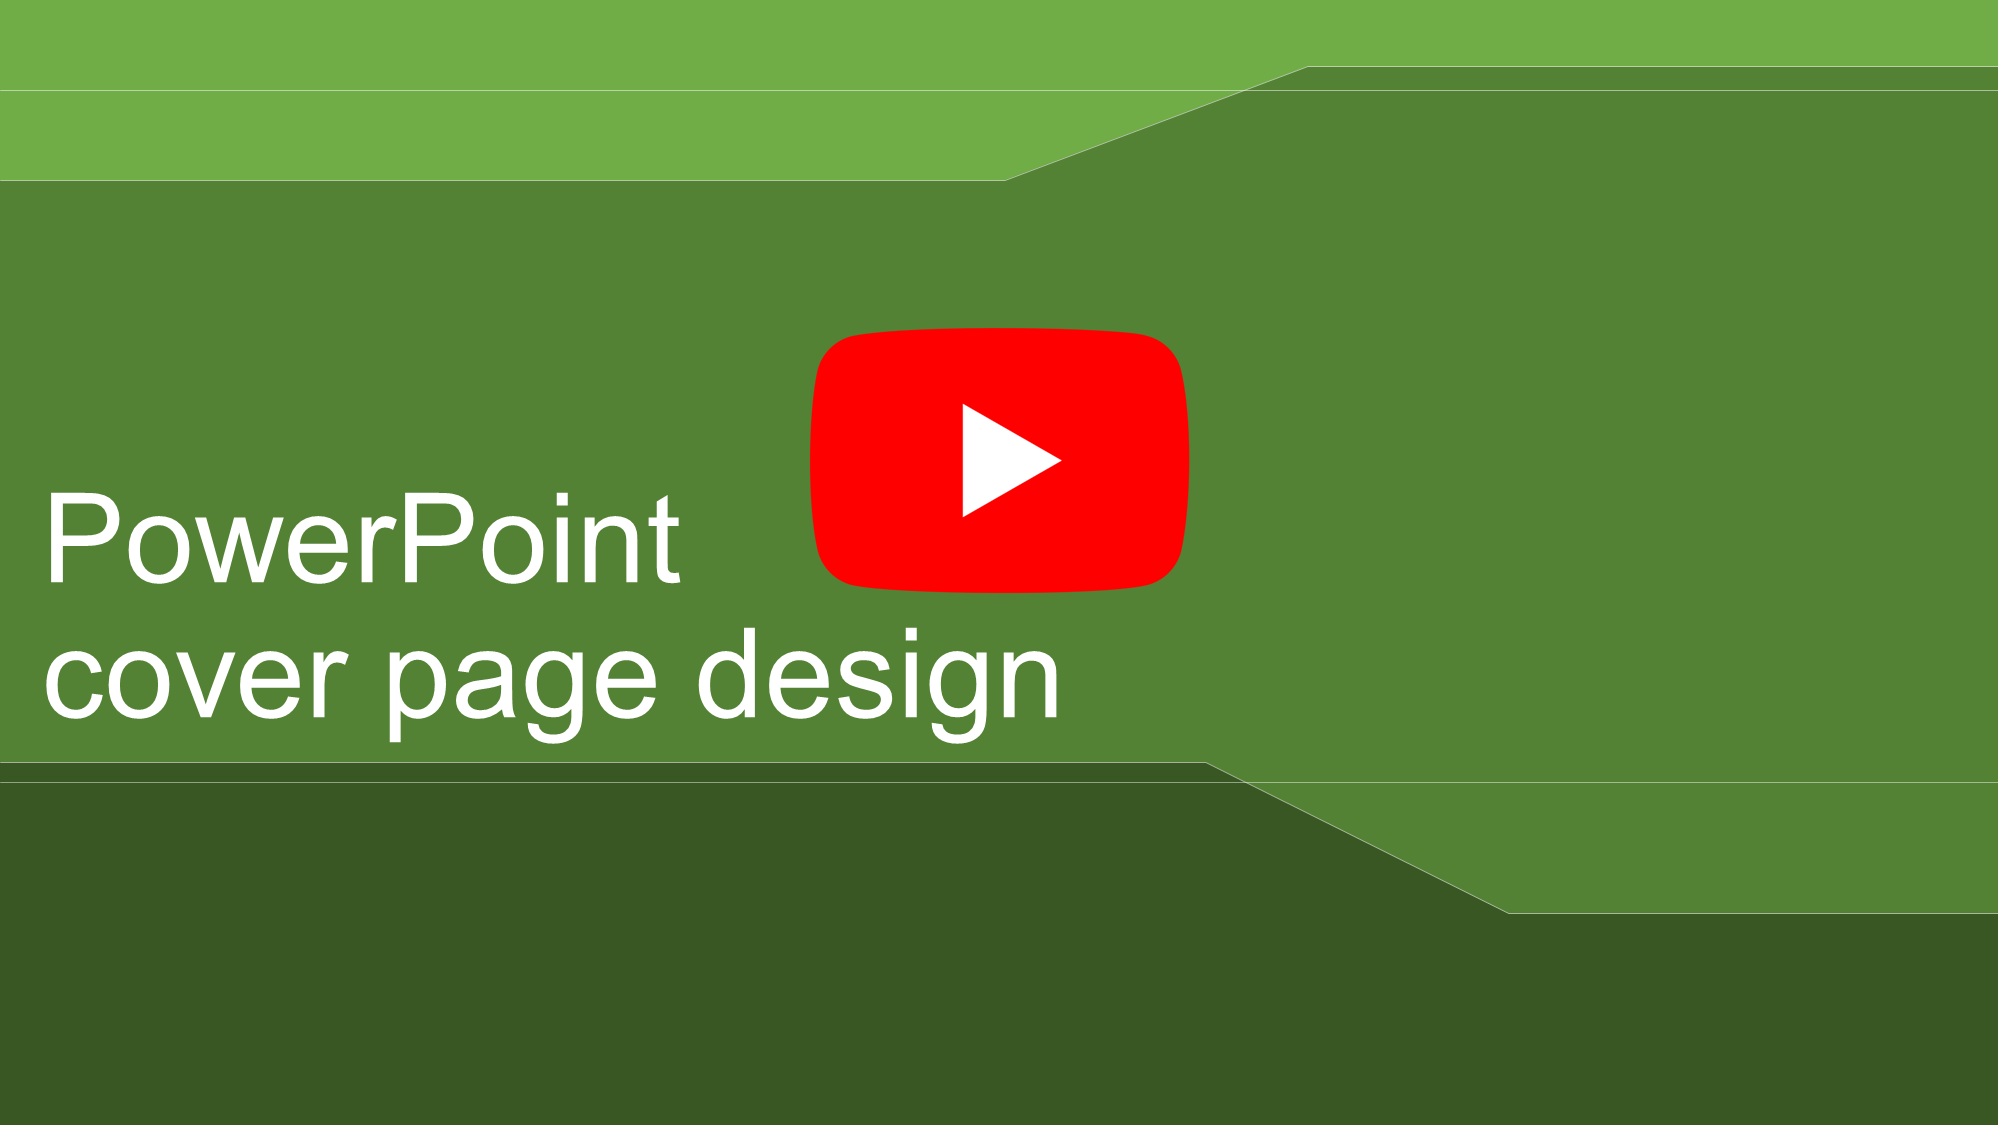 PowerPoint cover page design video